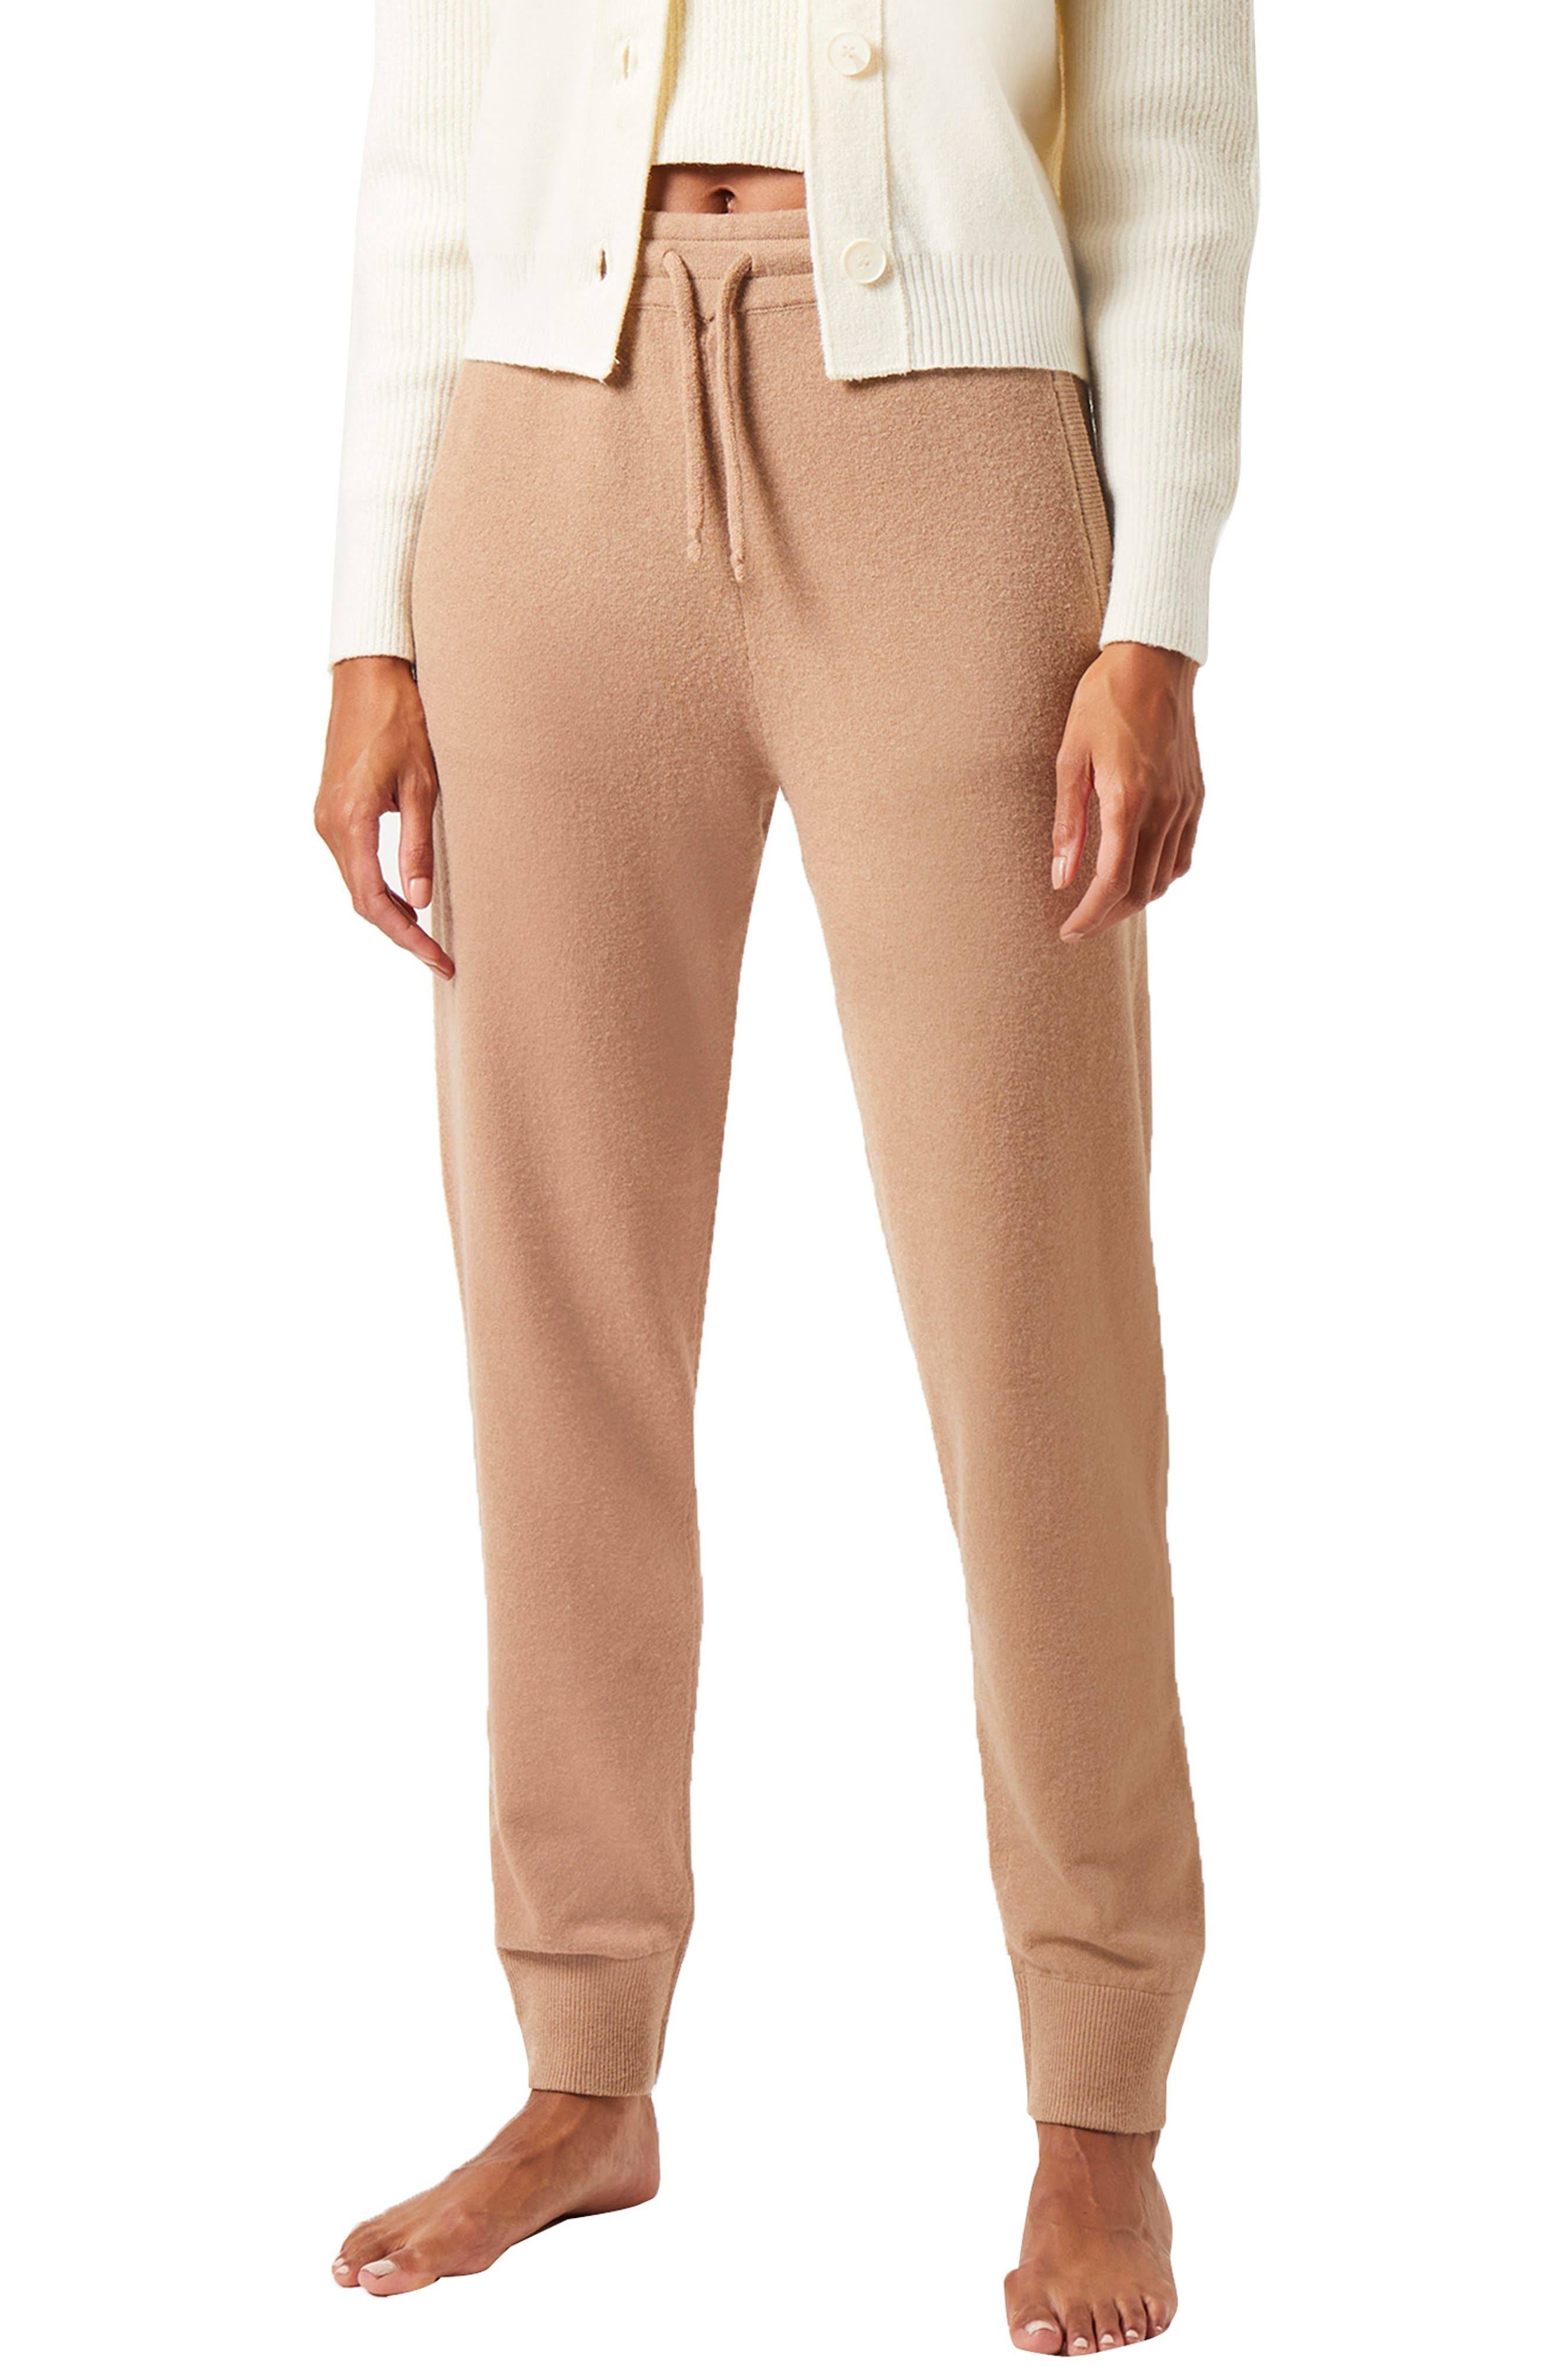 Comfortable Tan Jogger Pants for Casual Wear | Image